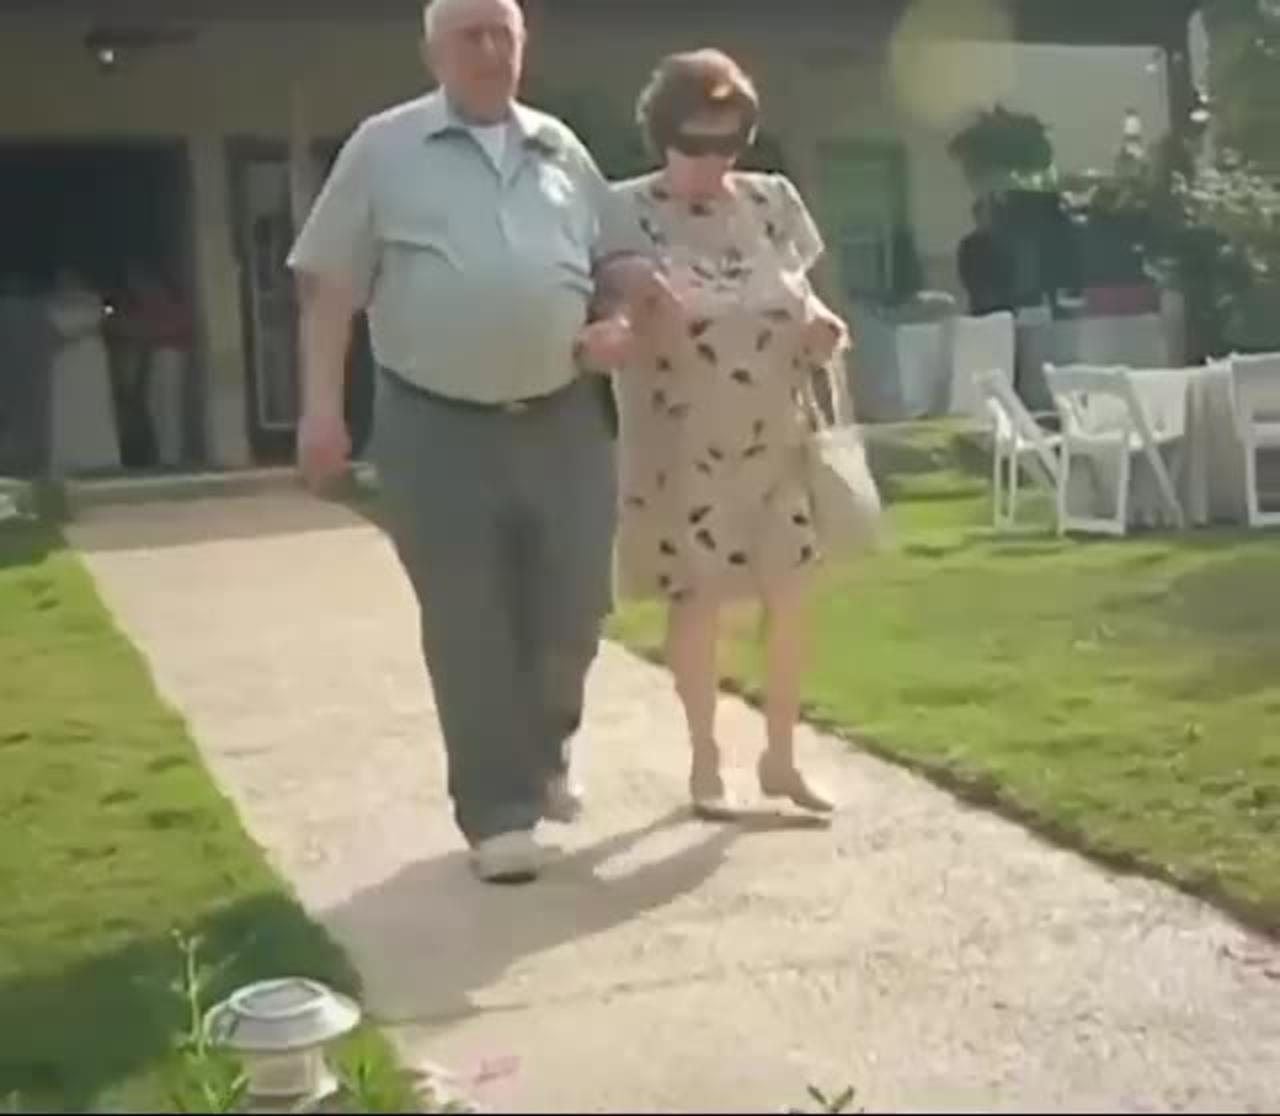 Wedding Embarrassing Moments - One News Page VIDEO